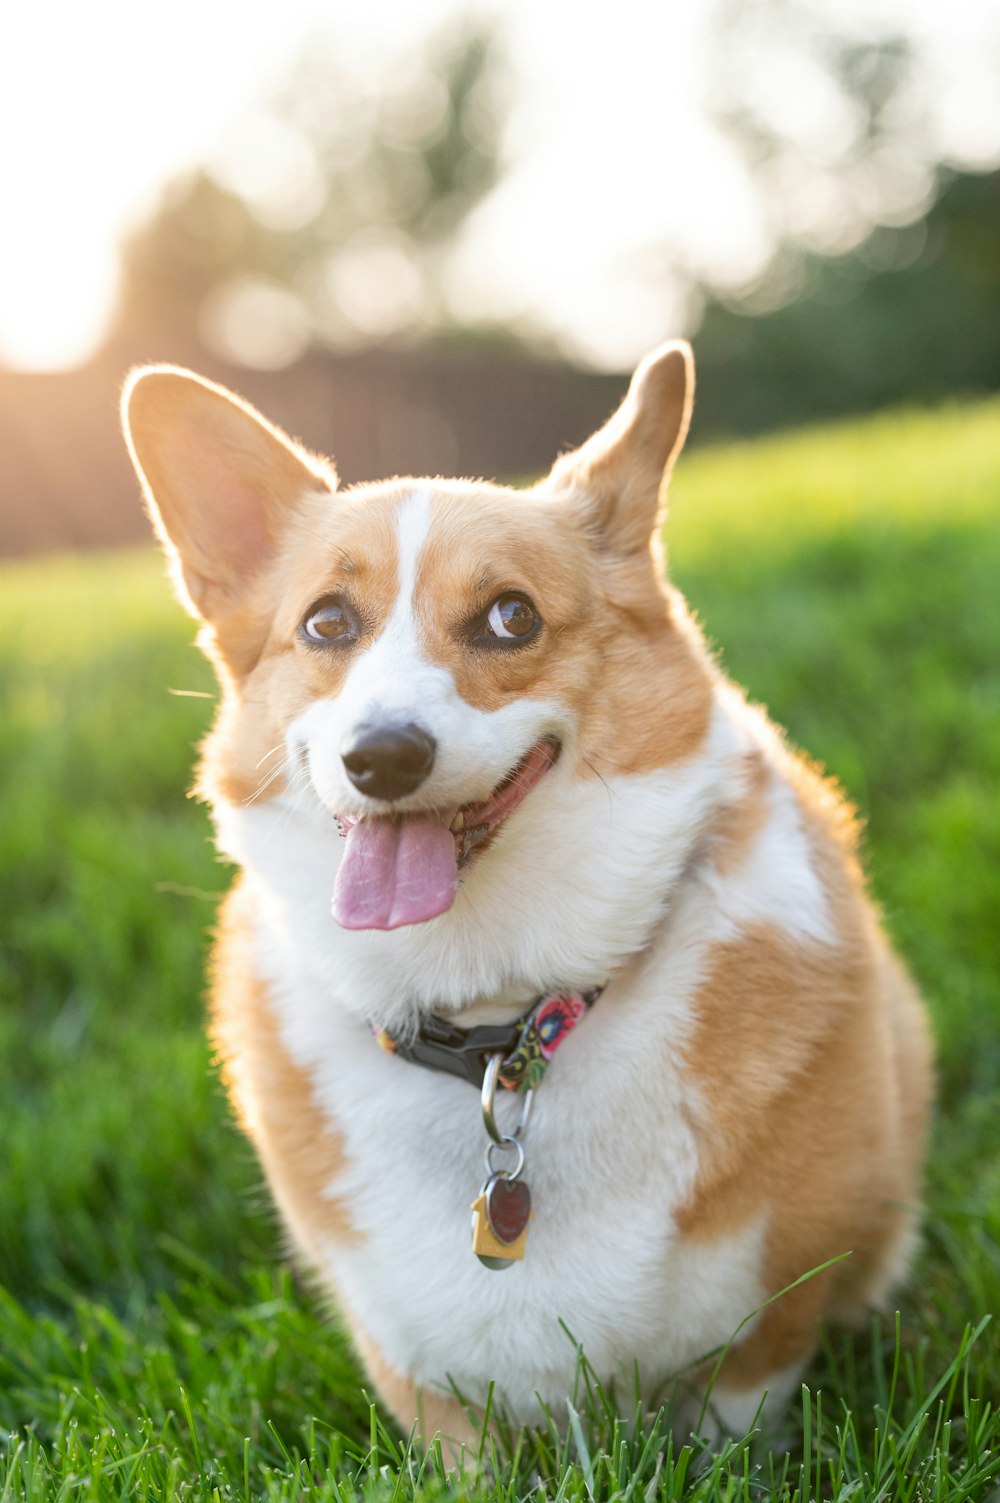 brown and white corgi dog on green grass field during daytime